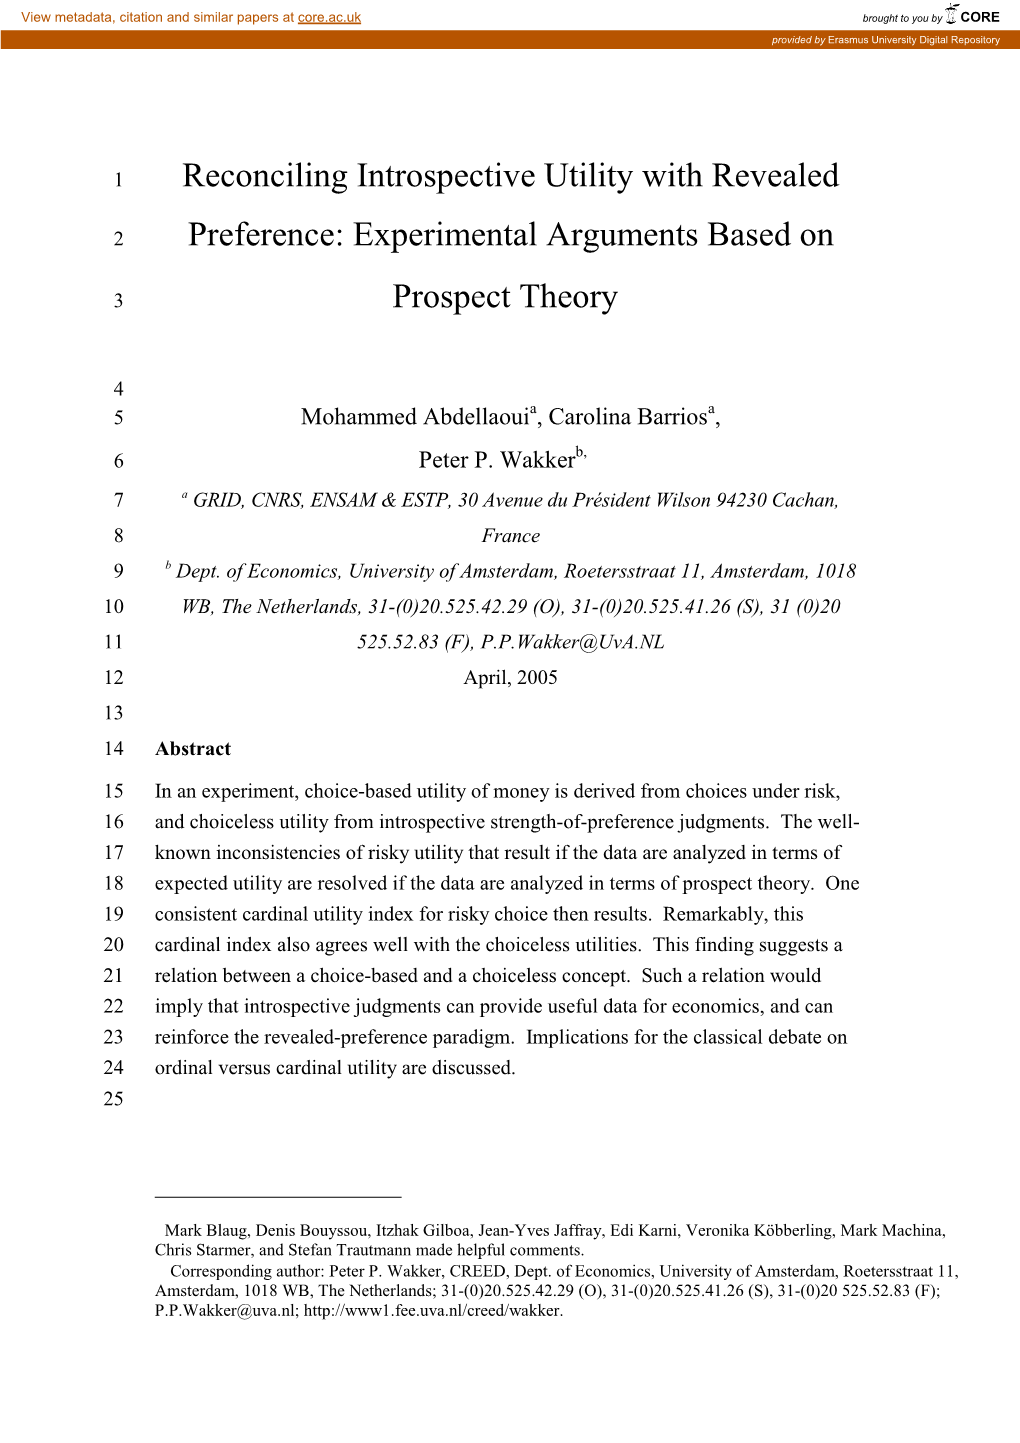 Reconciling Introspective Utility with Revealed Preference: Experimental Arguments Based on Prospect Theory